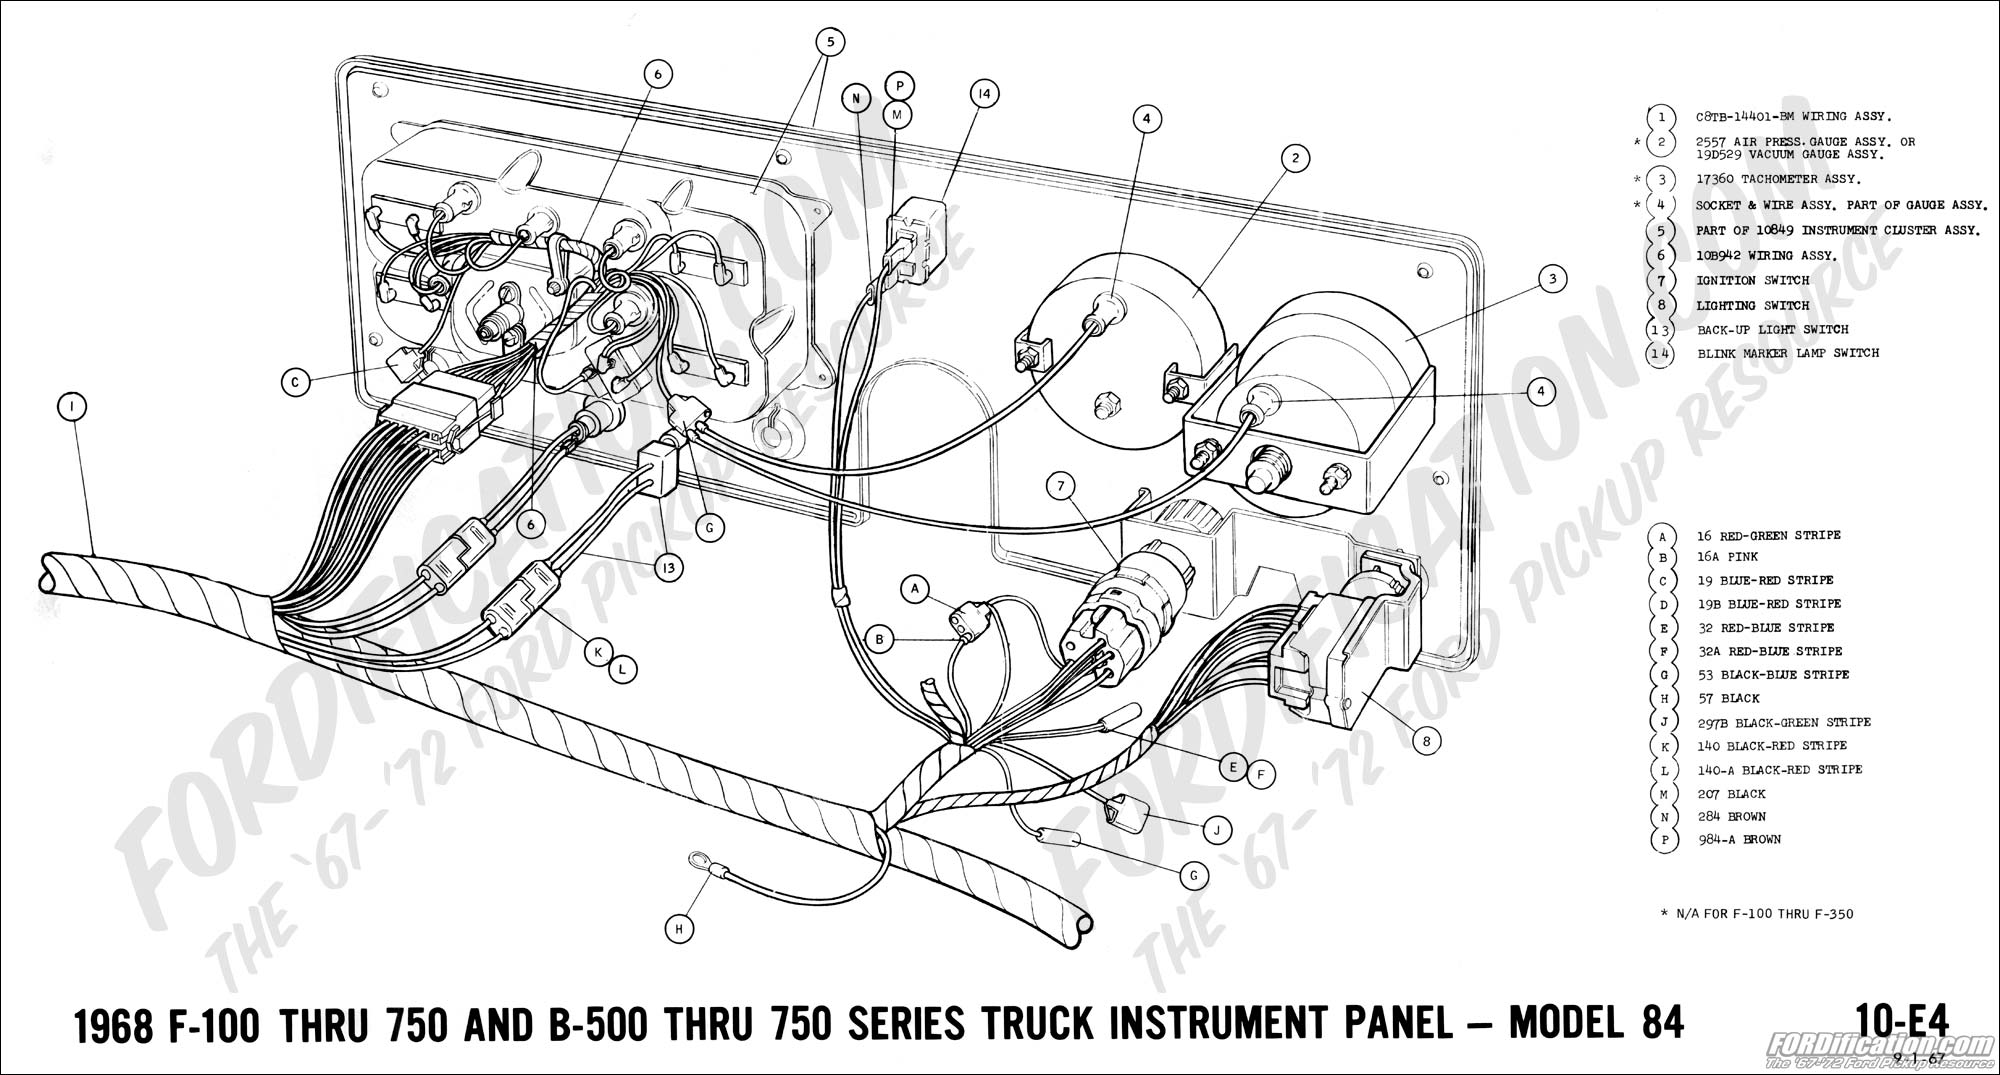 Ford Truck Technical Drawings and Schematics - Section H - Wiring Diagrams